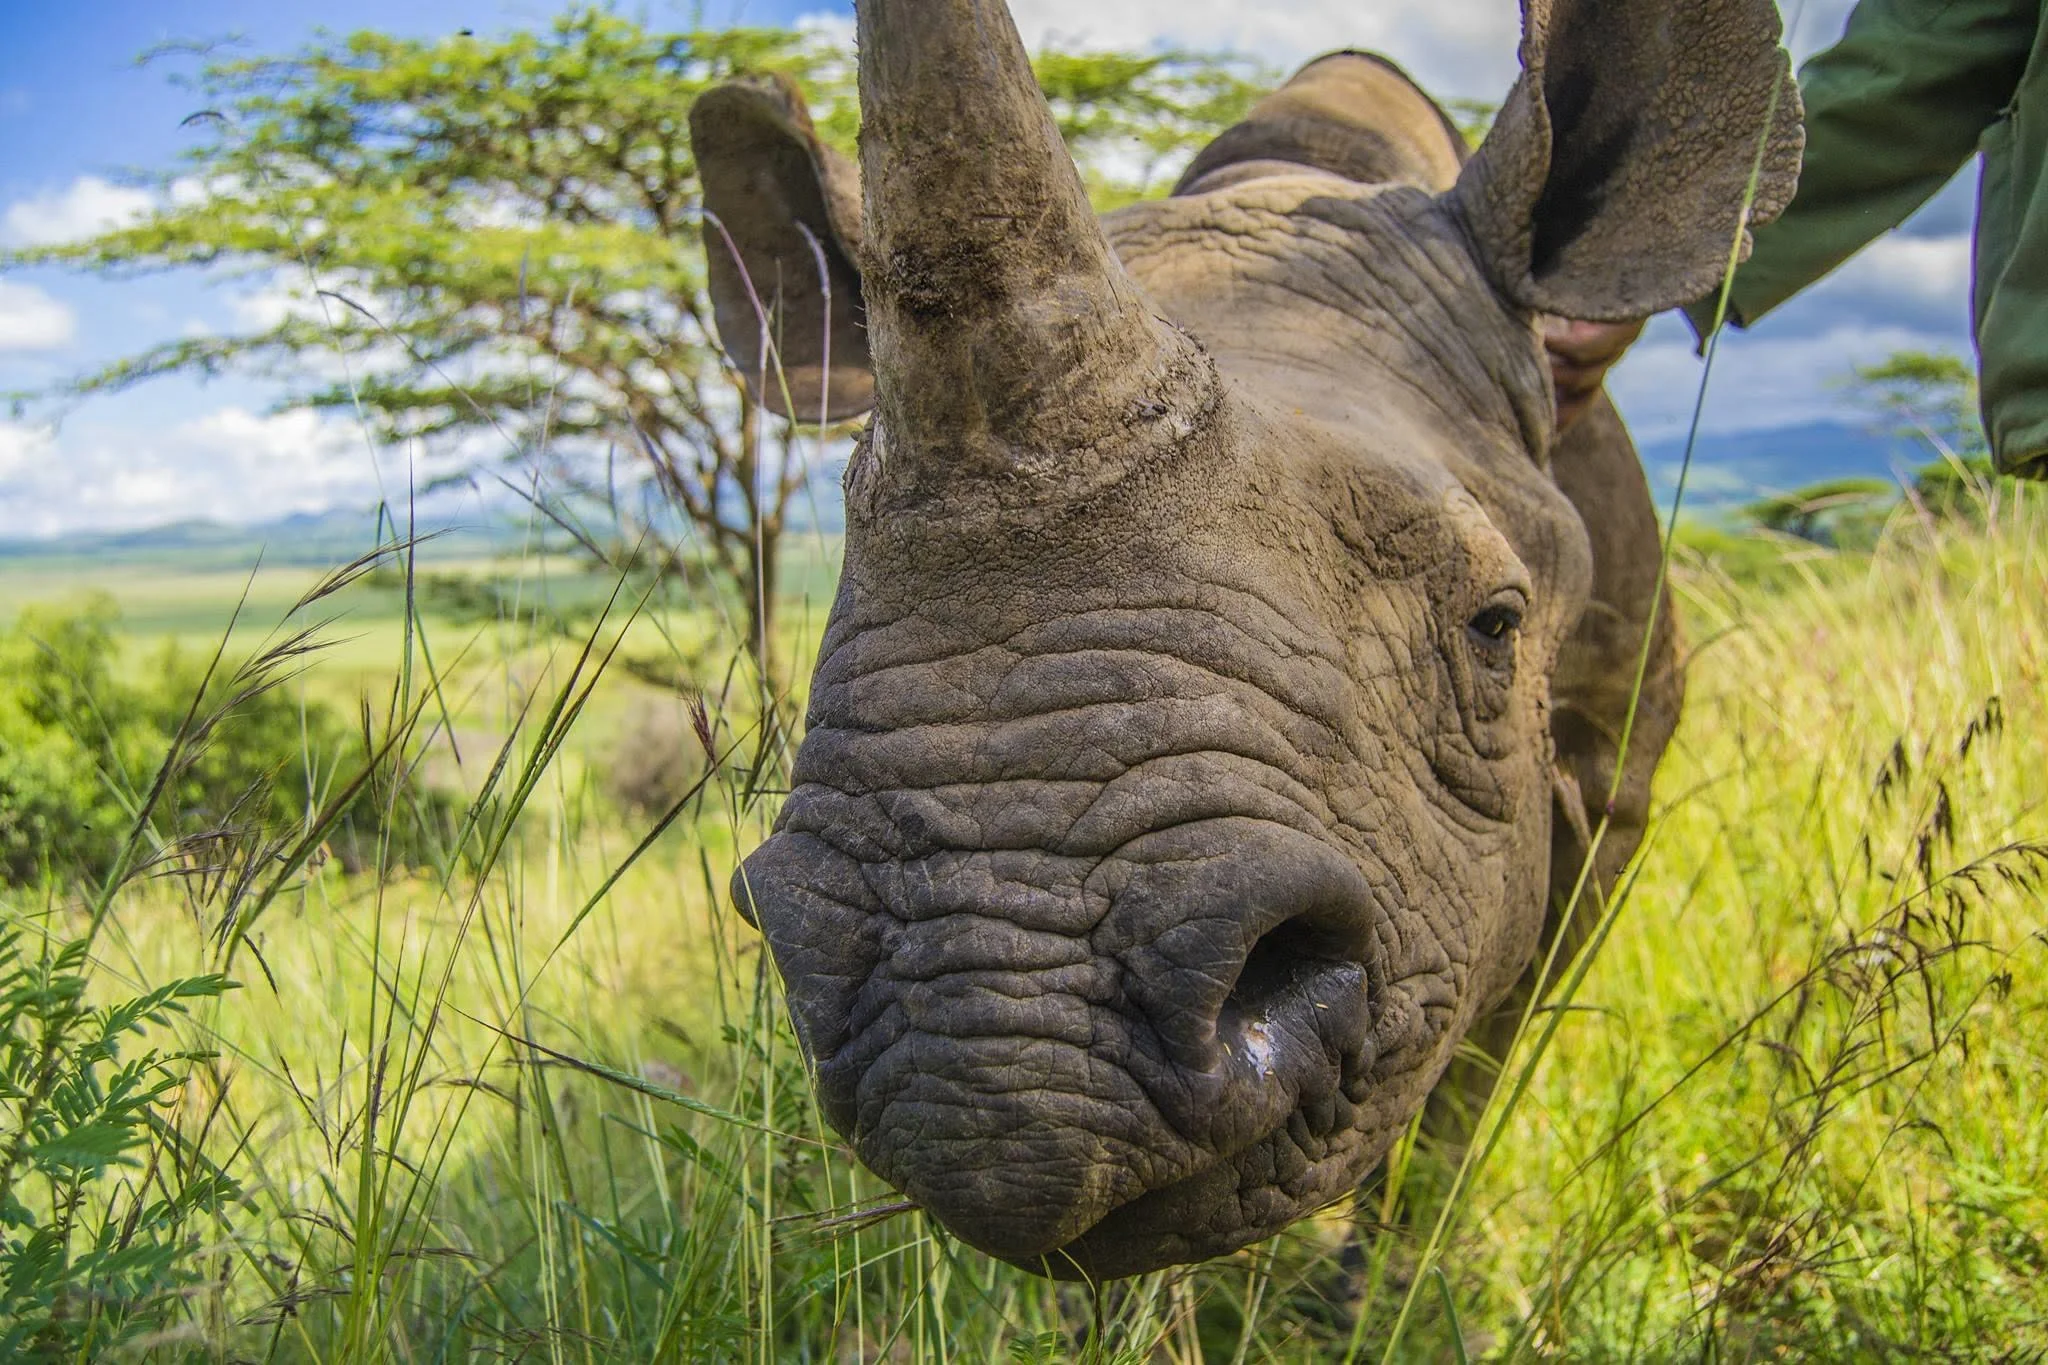 a close-up of a rhinoceros in a grassy field<br />
